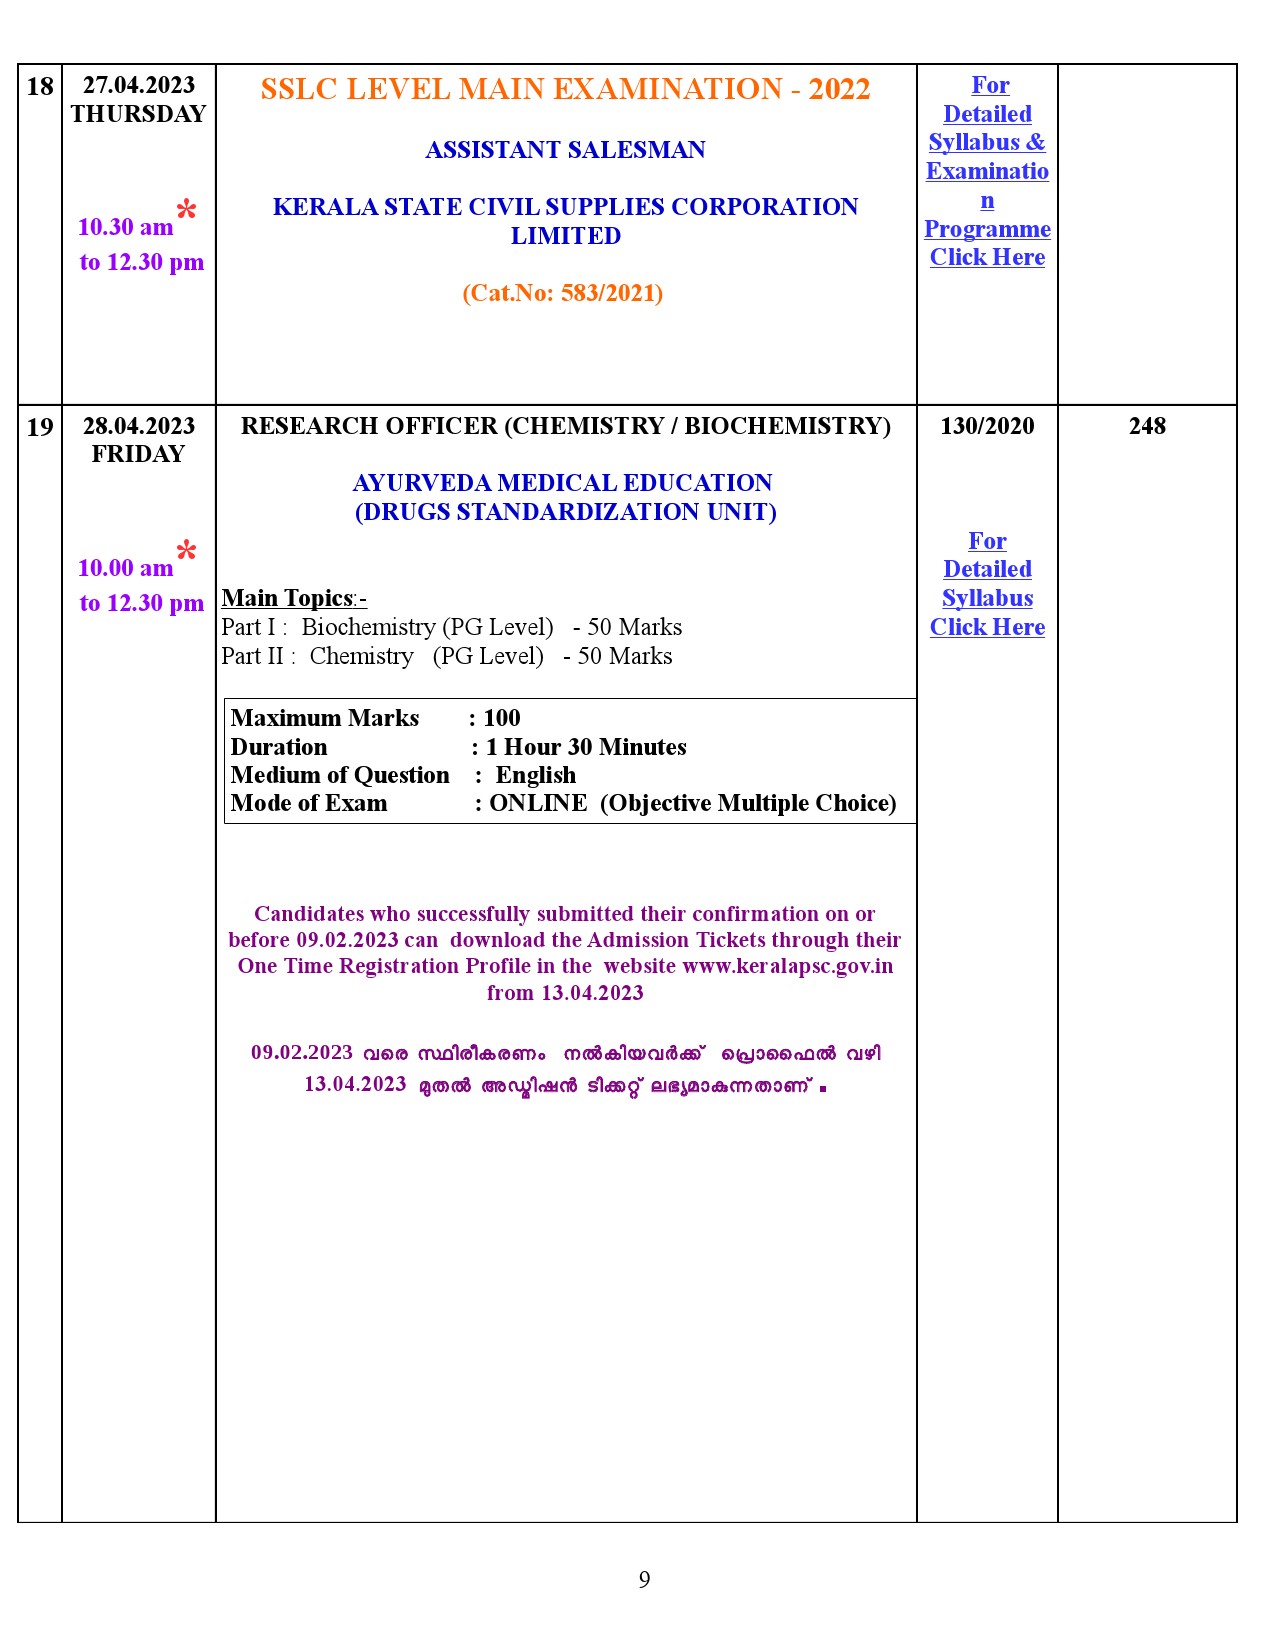 Examination Programme For The Month Of April 2023 - Notification Image 9